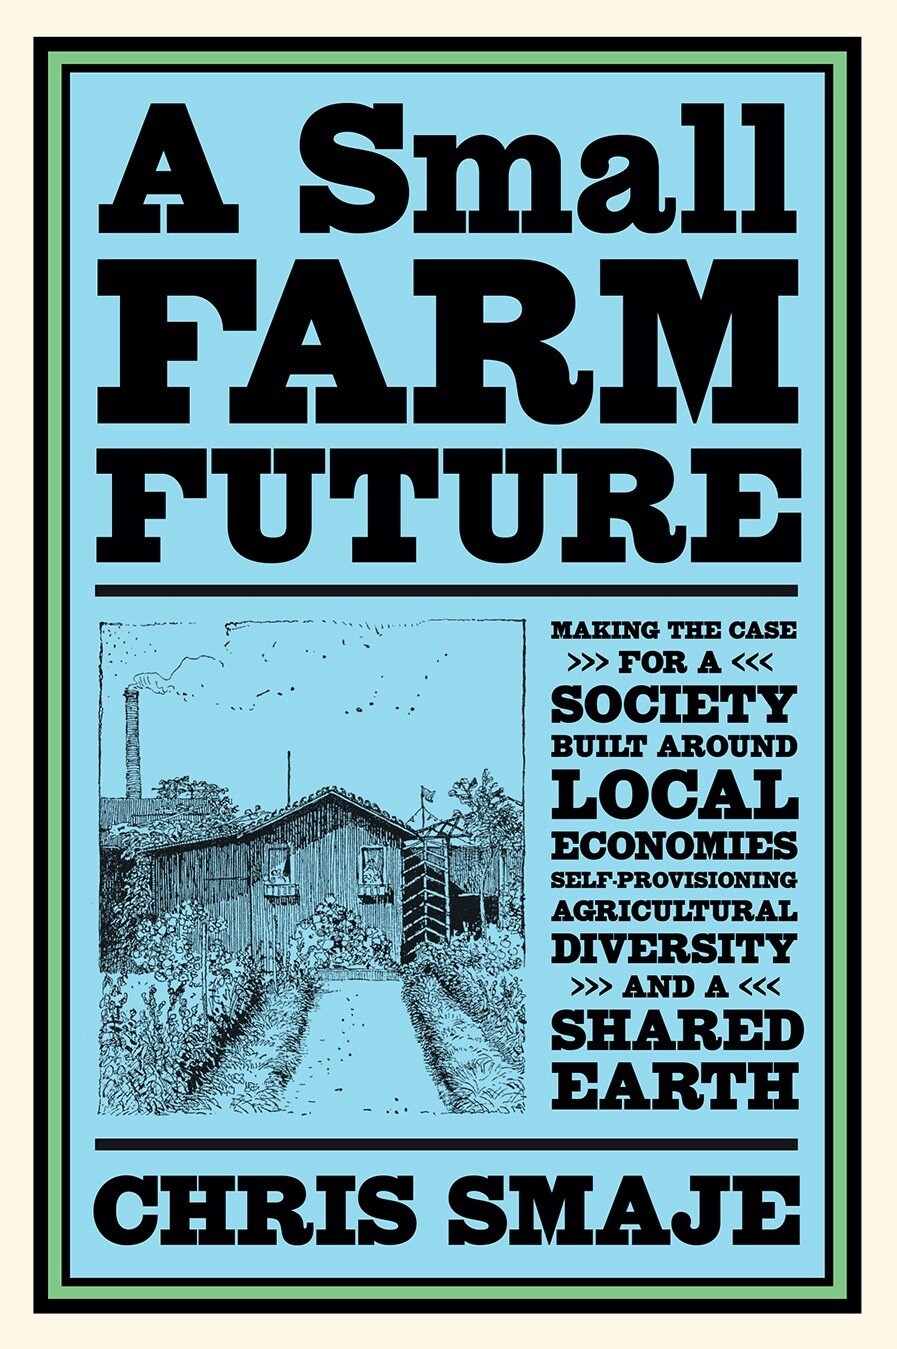 A Small Farm Future: Making the Case for a Society Built Around Local Economies, Self-Provisioning, Agricultural Diversity and a Shared Ear (Paperback)